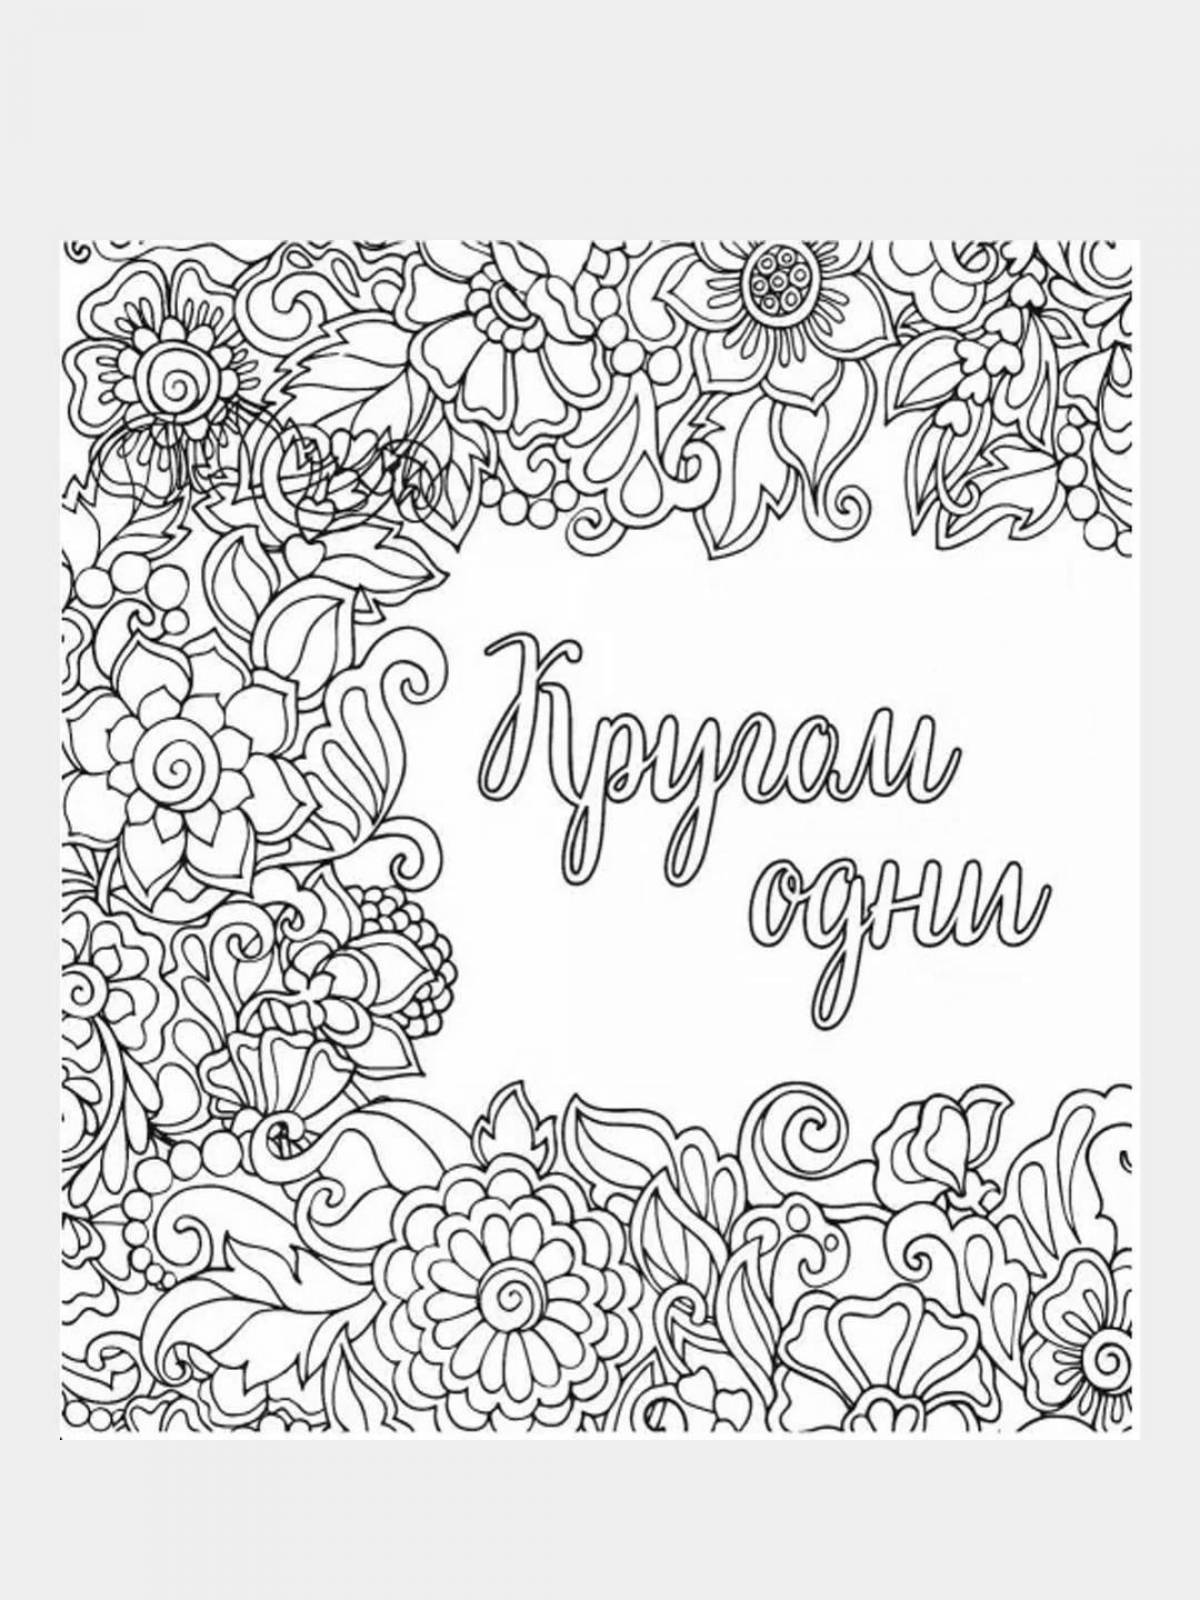 Attractive anti-stress coloring mat